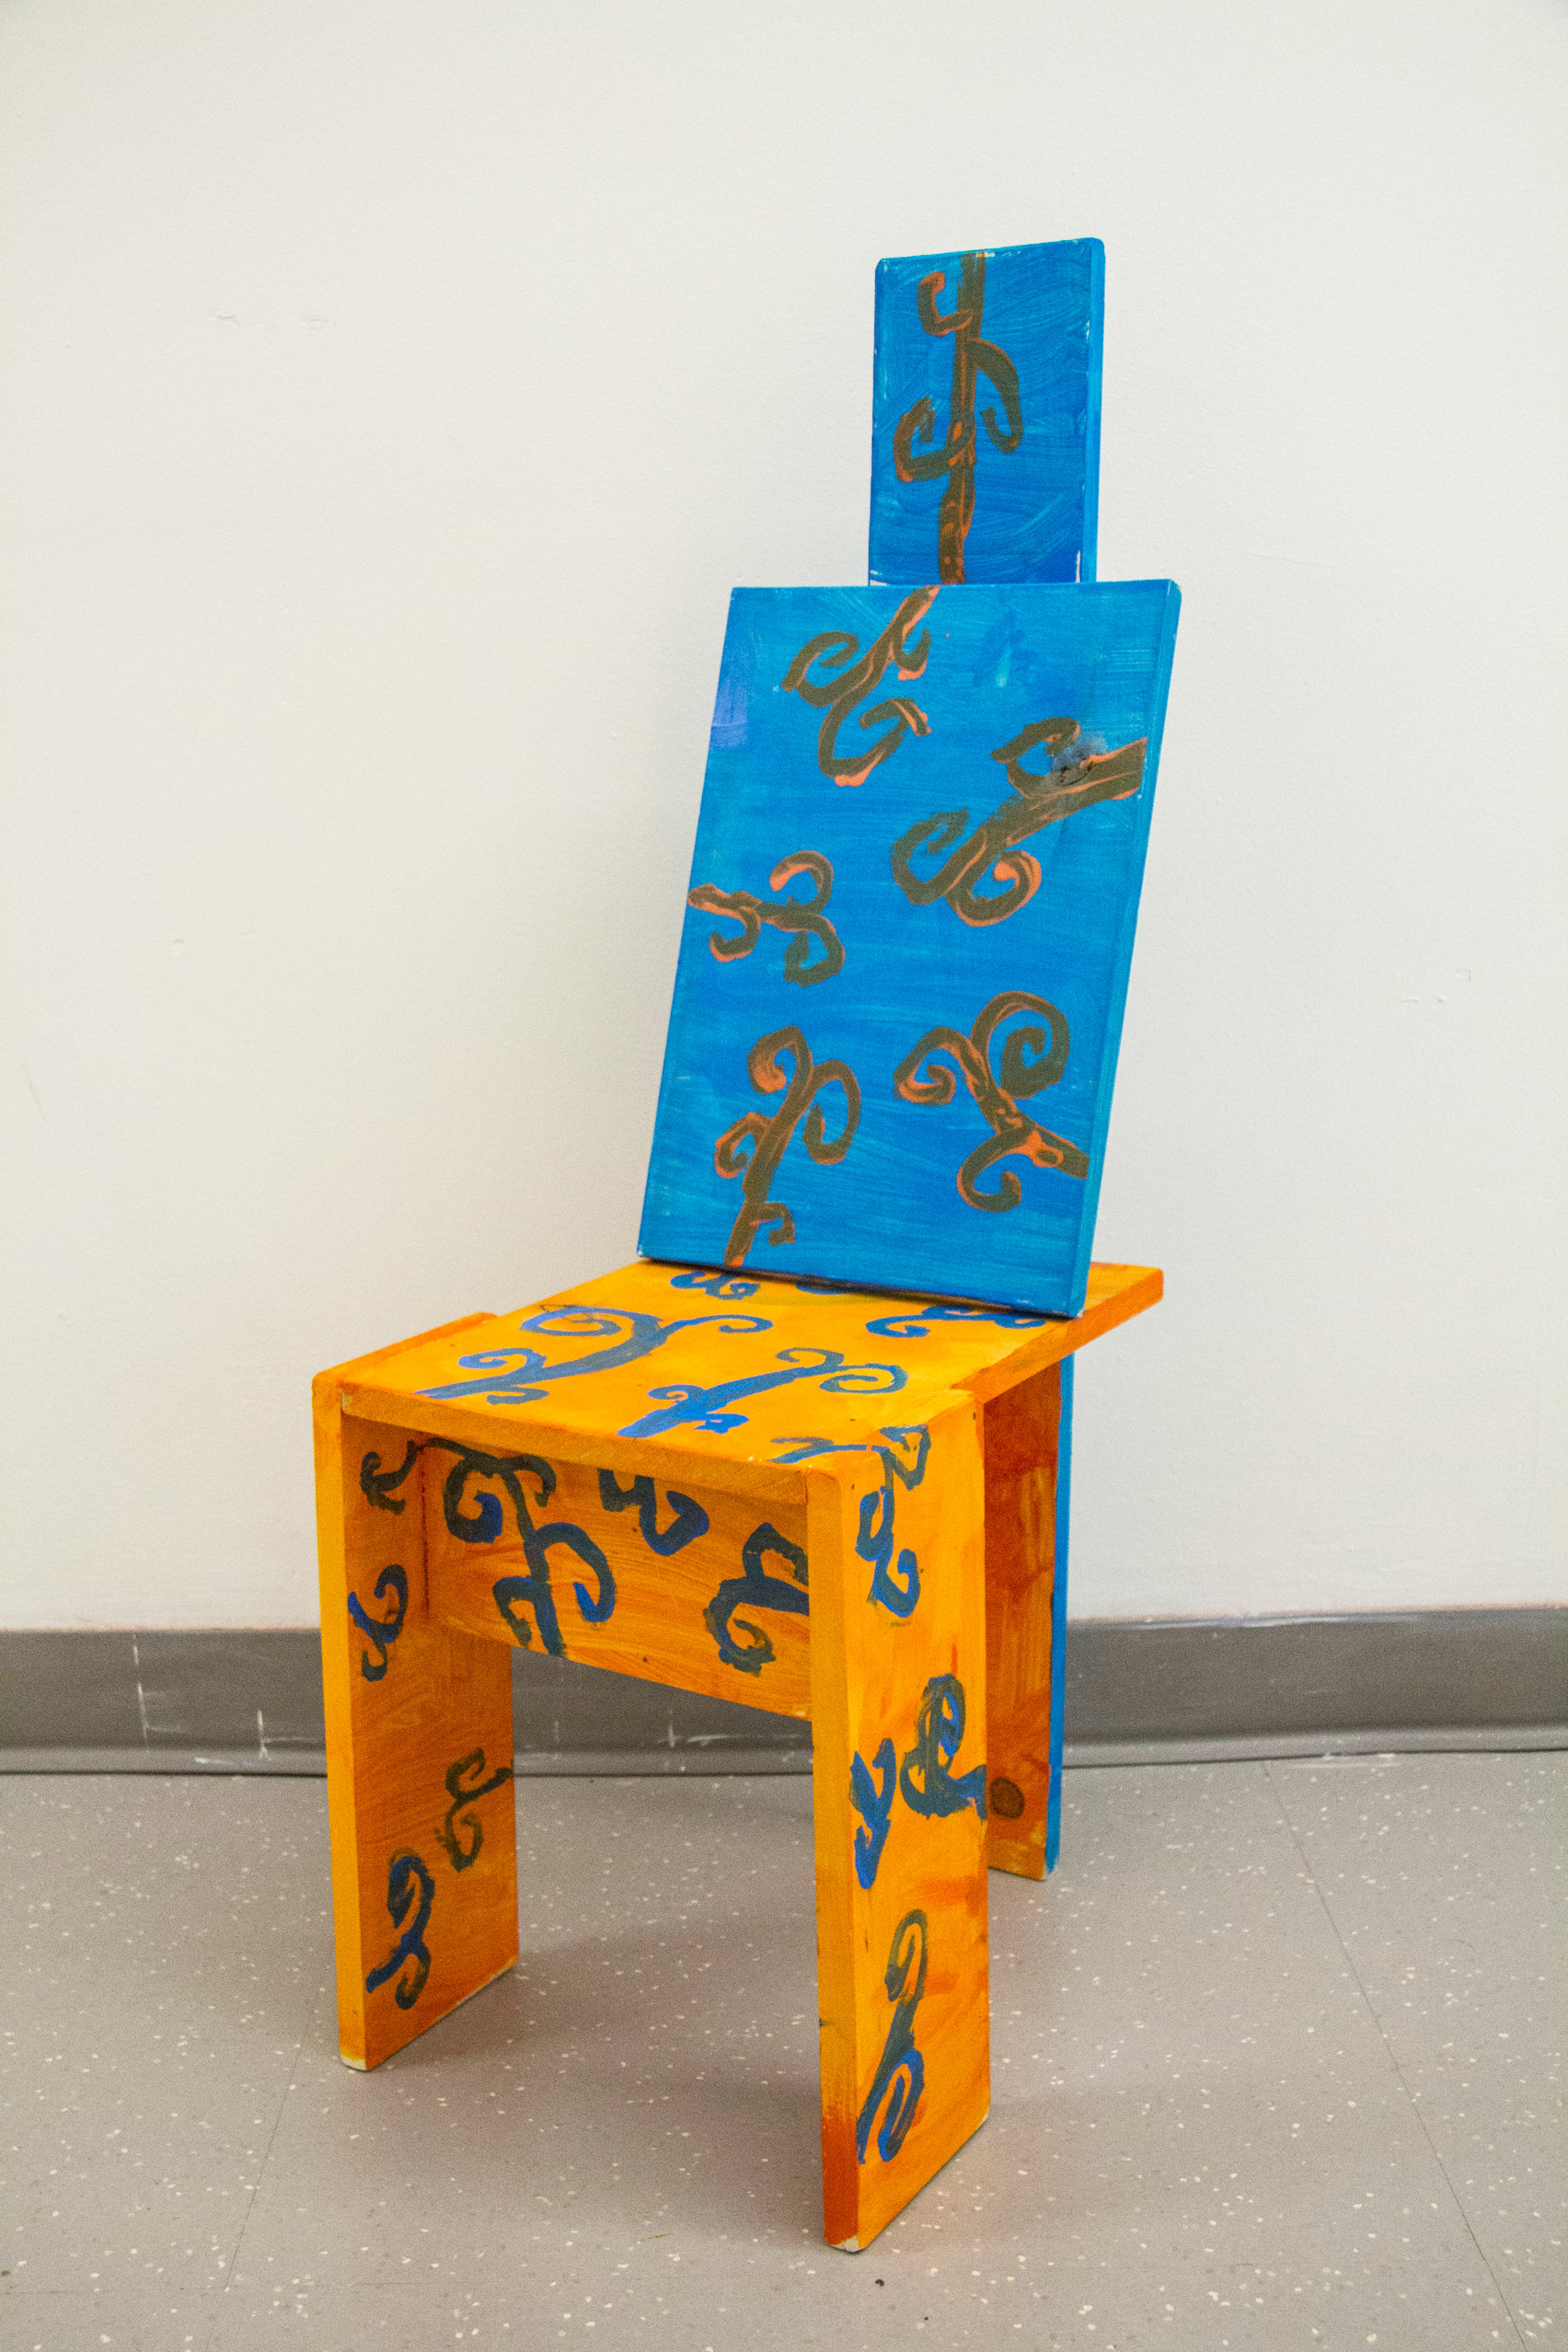 Blue and Orange seating design from Bruce Edelstein's workshop at Trinity School